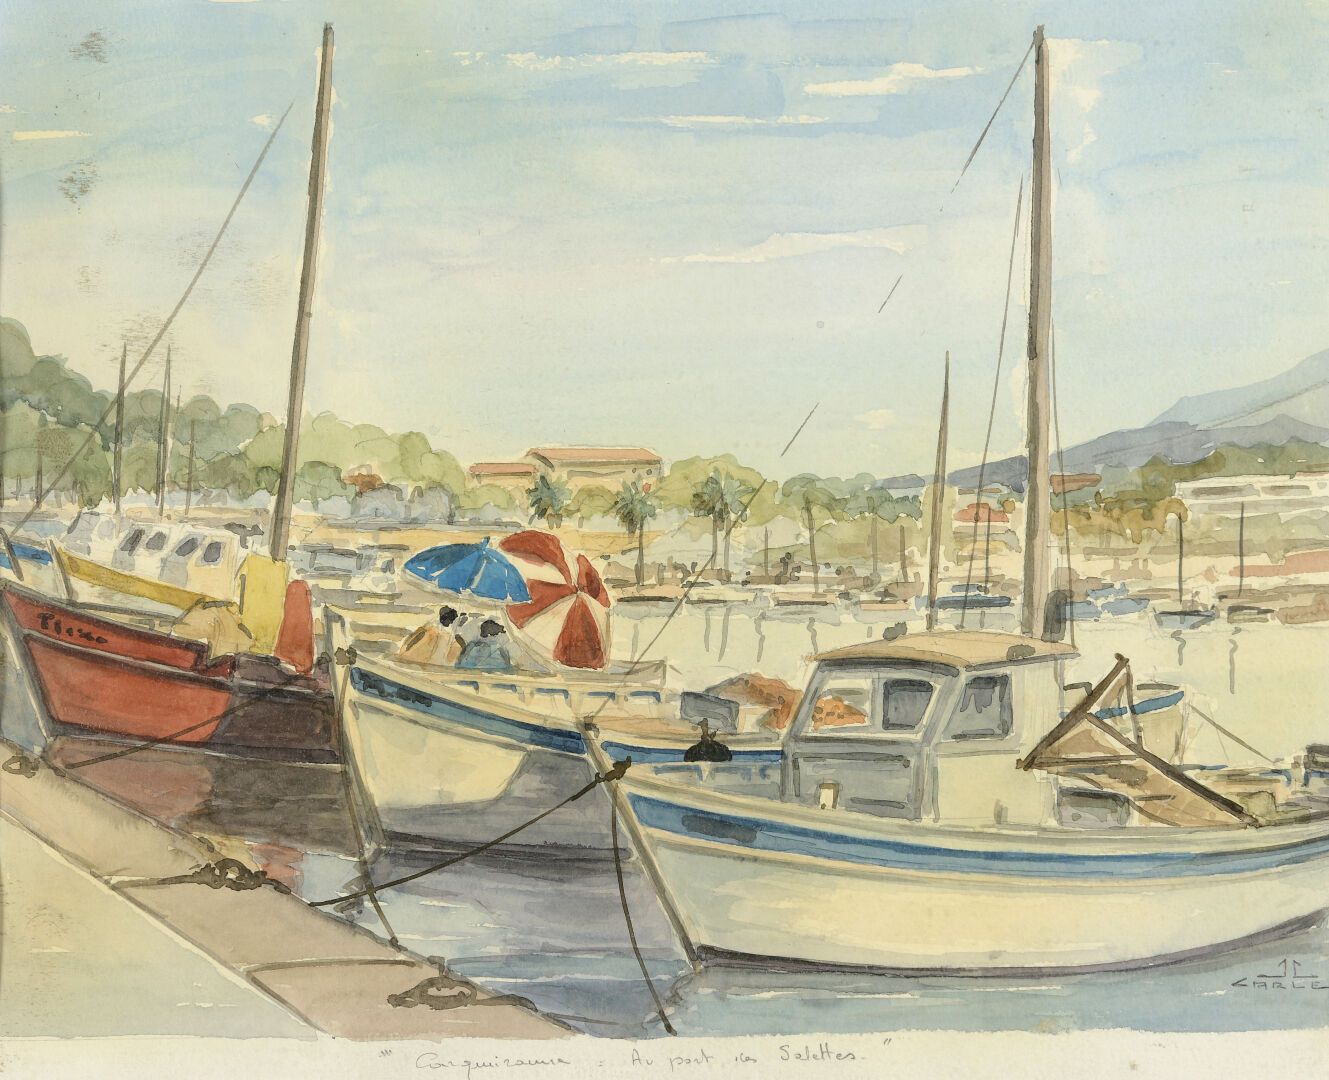 Null Jean-Louis CARLE (1938-2003).

"Conquarneau. At the Port of Sarlettes".

Wa&hellip;